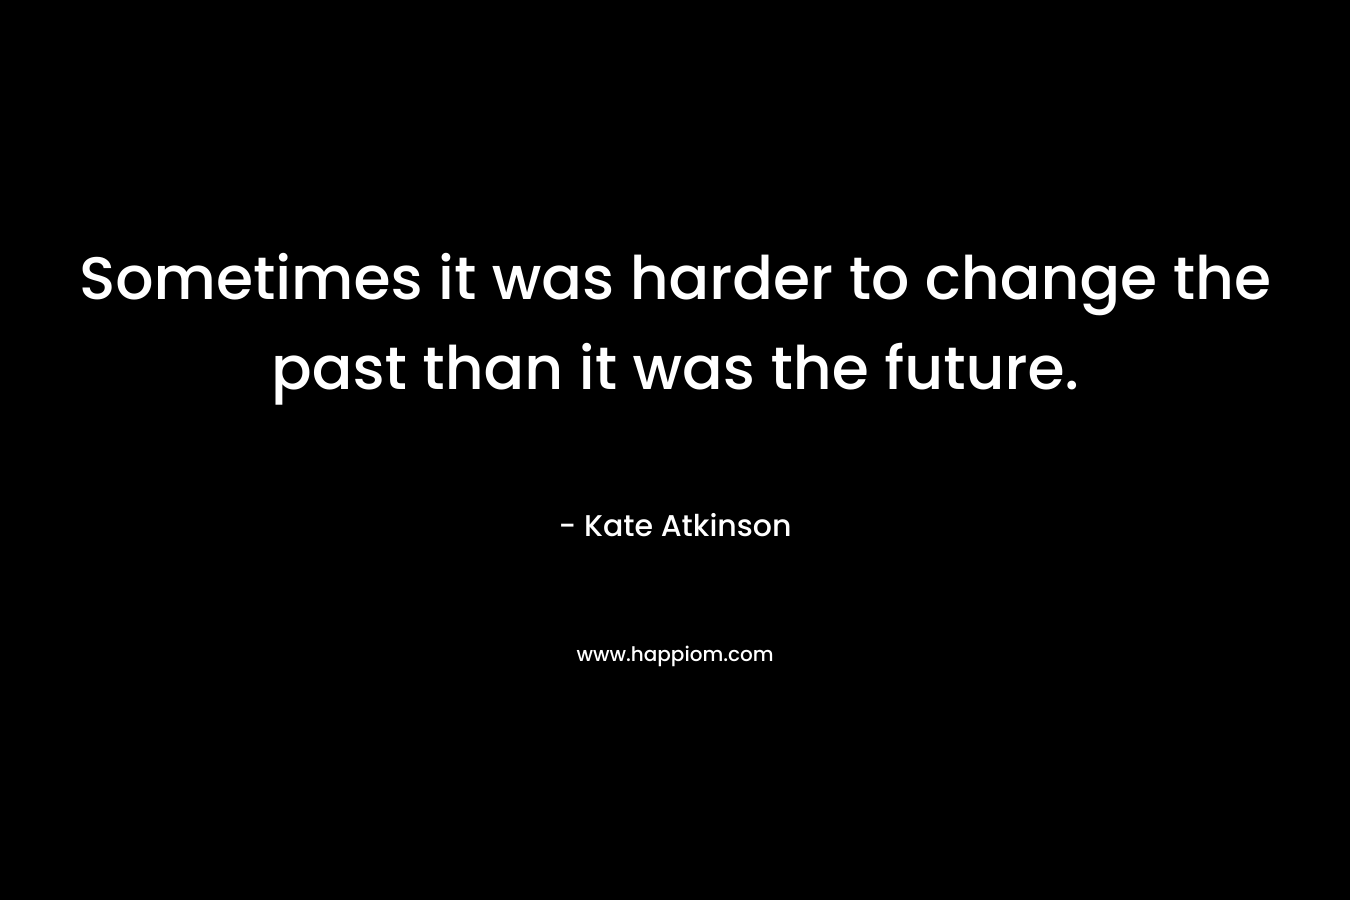 Sometimes it was harder to change the past than it was the future.